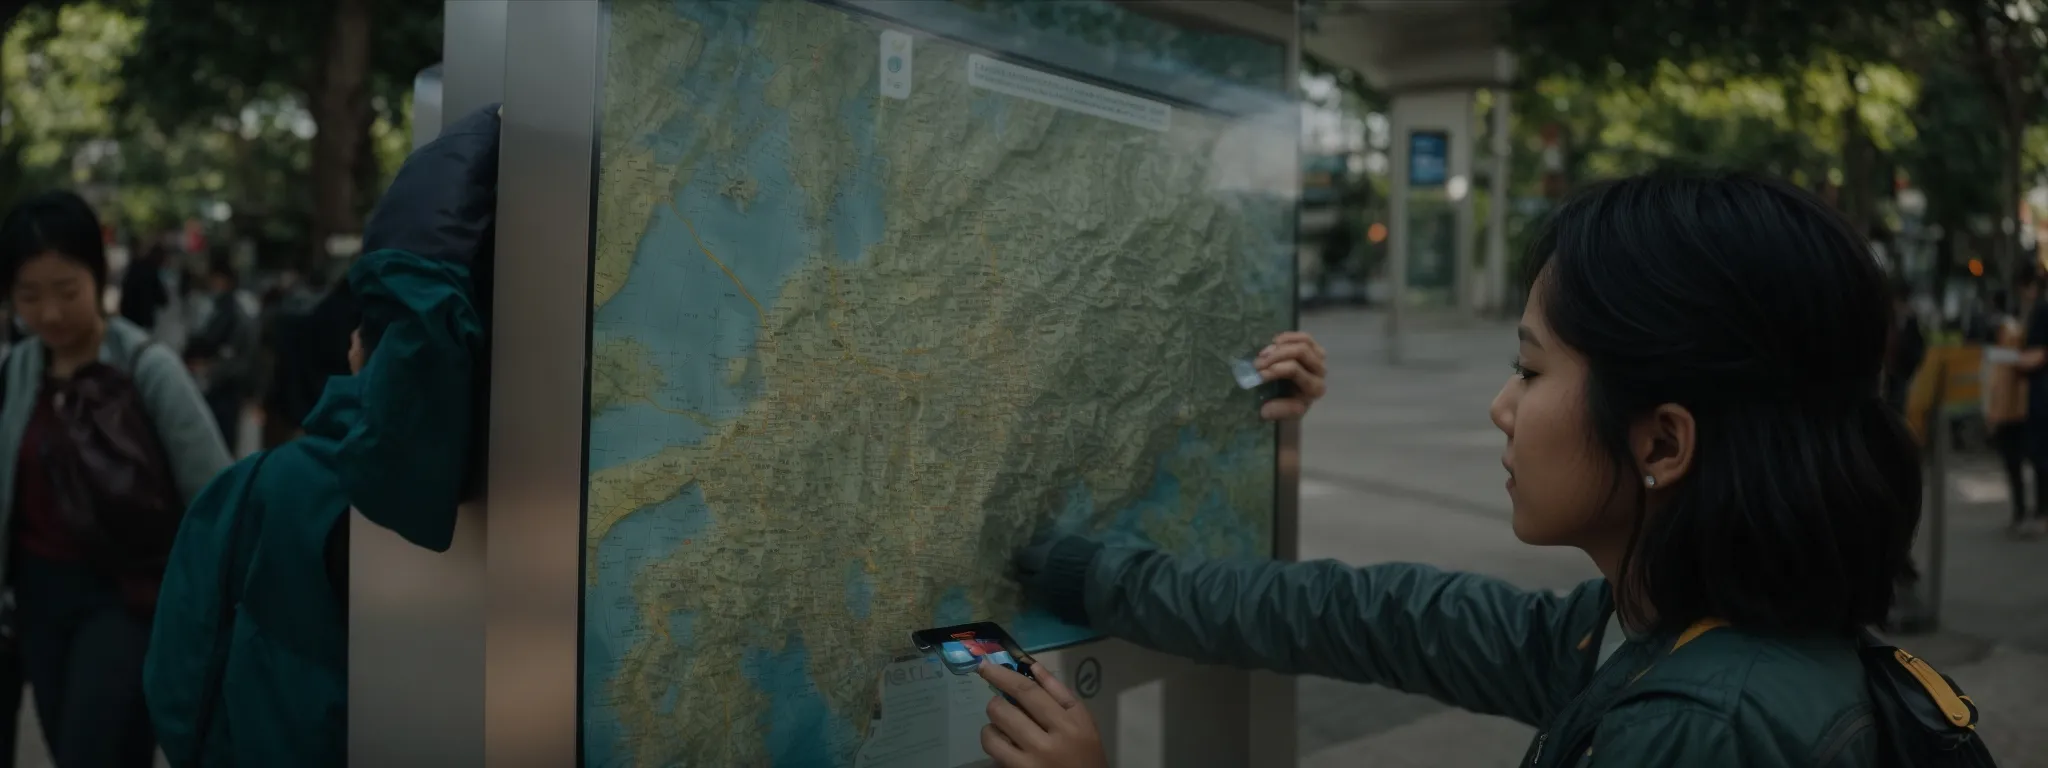 a traveler interacts with an intuitive touchscreen map at an information kiosk.